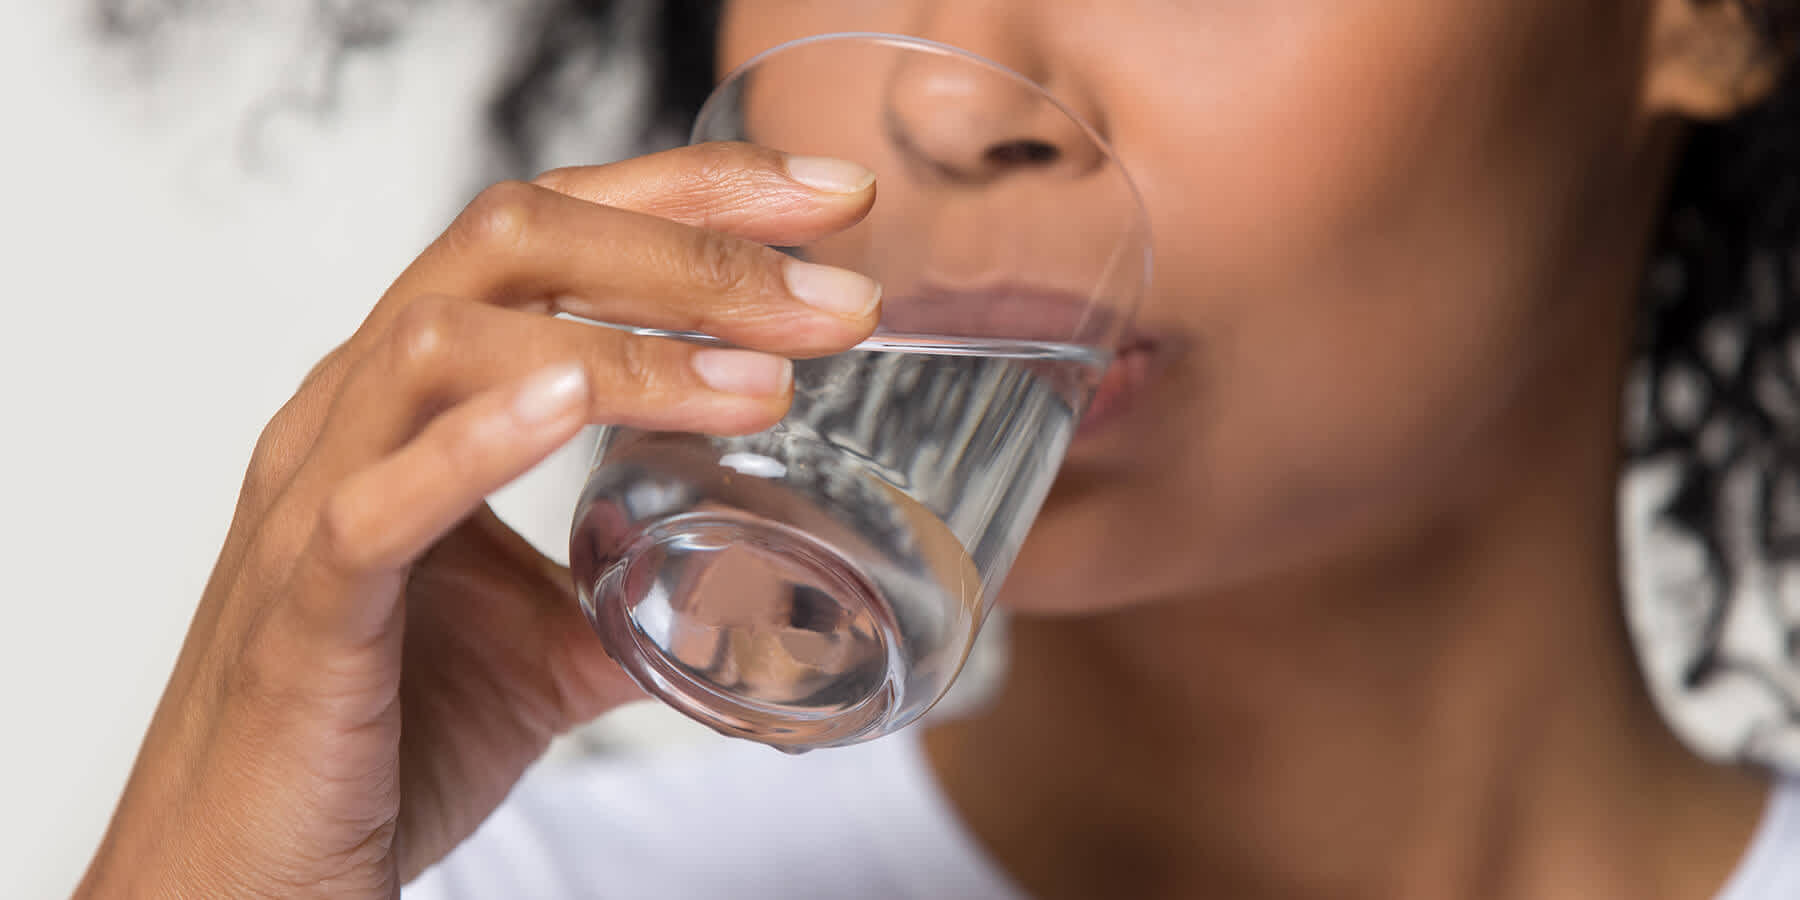 Thirsty woman drinking water while experiencing polydipsia